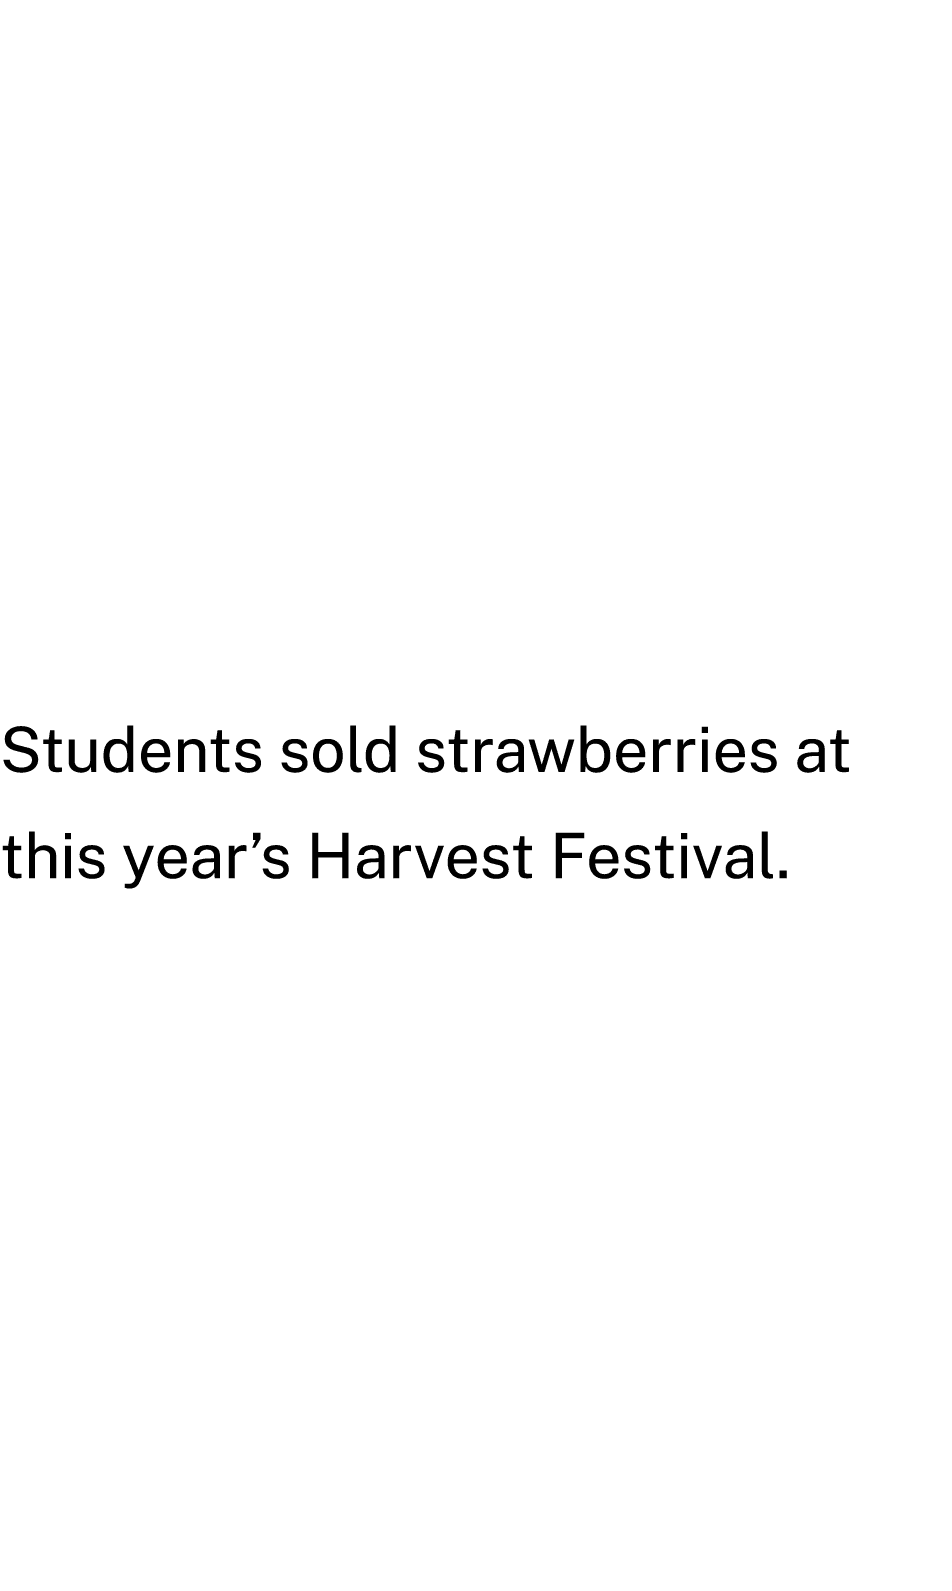 Students sold strawberries at this year’s Harvest Festival.